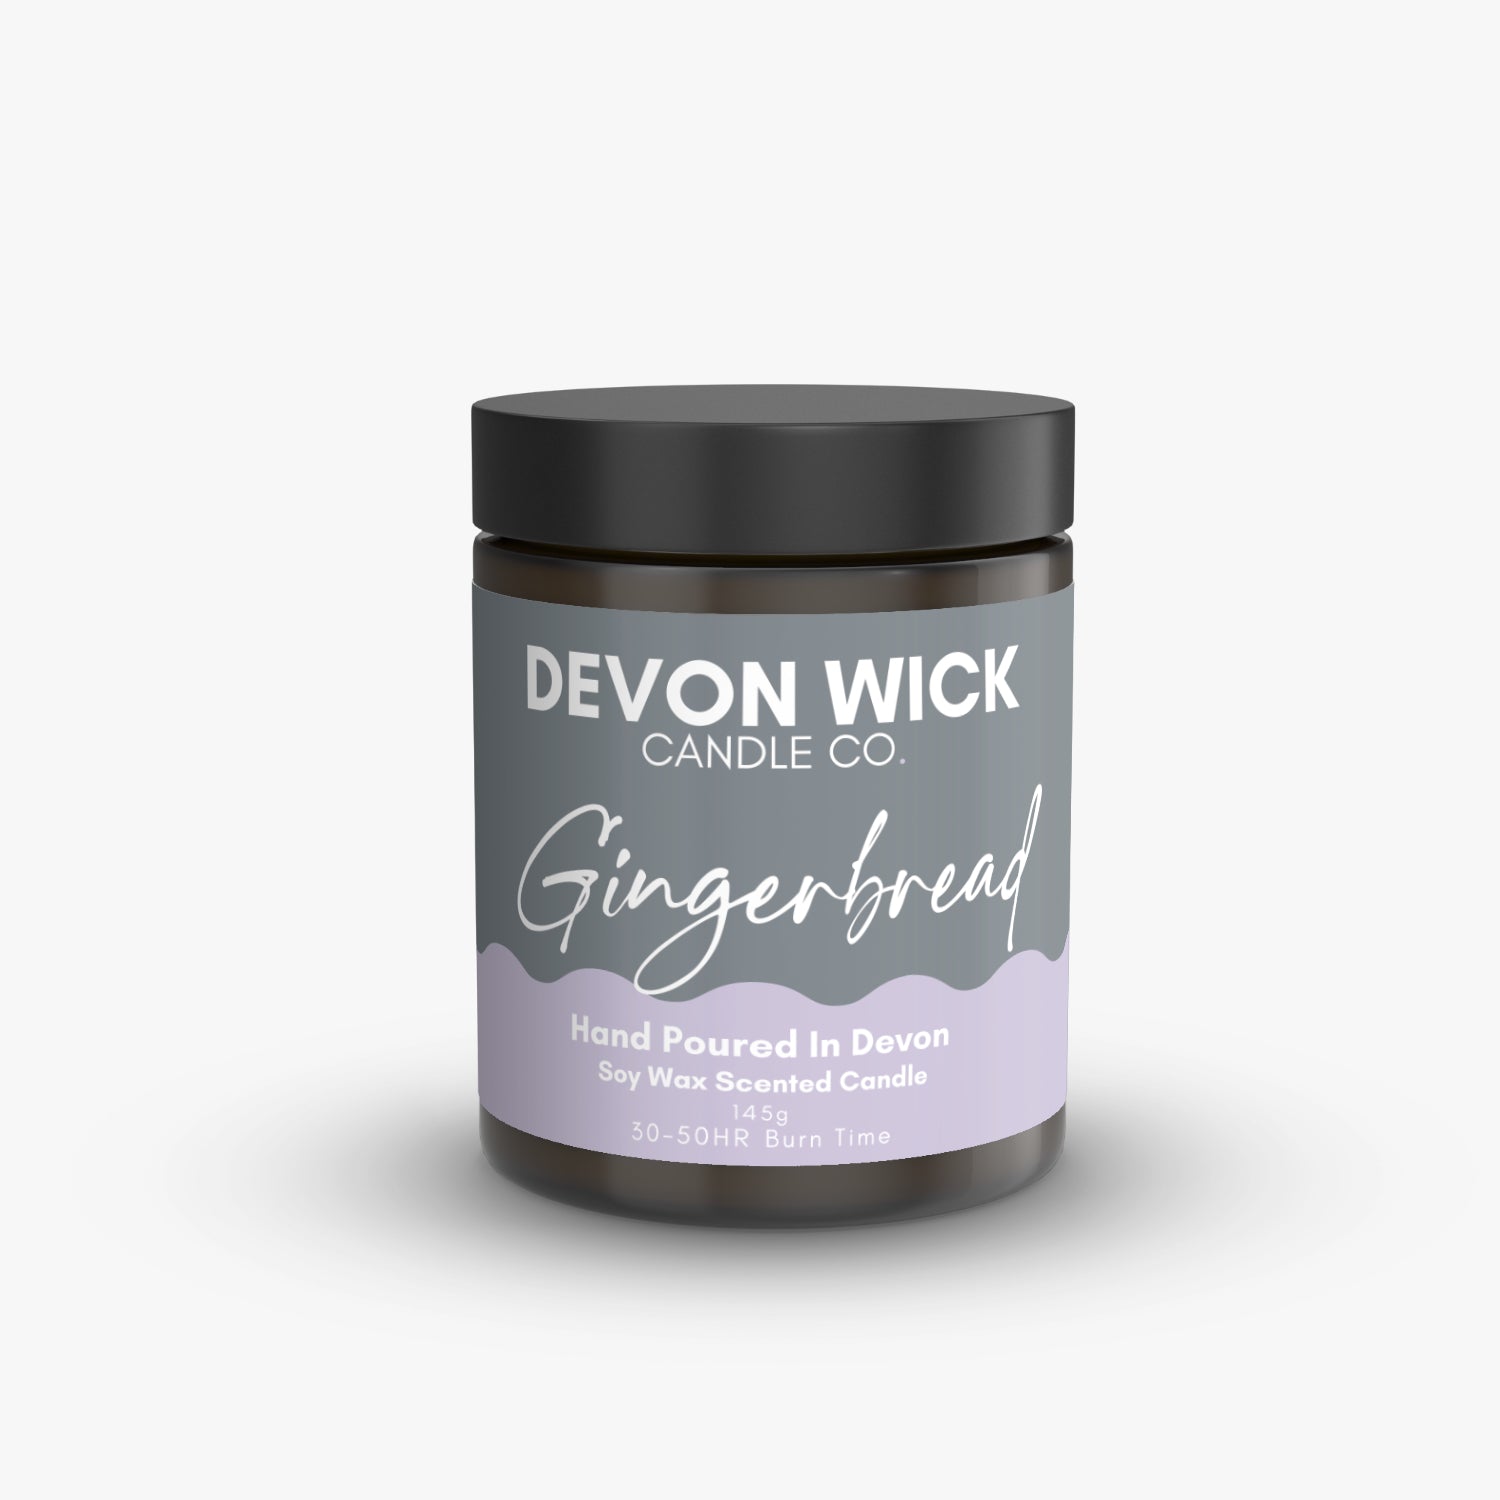 Devon Wick Candle Co. Limited Gingerbread Soy Wax Candle